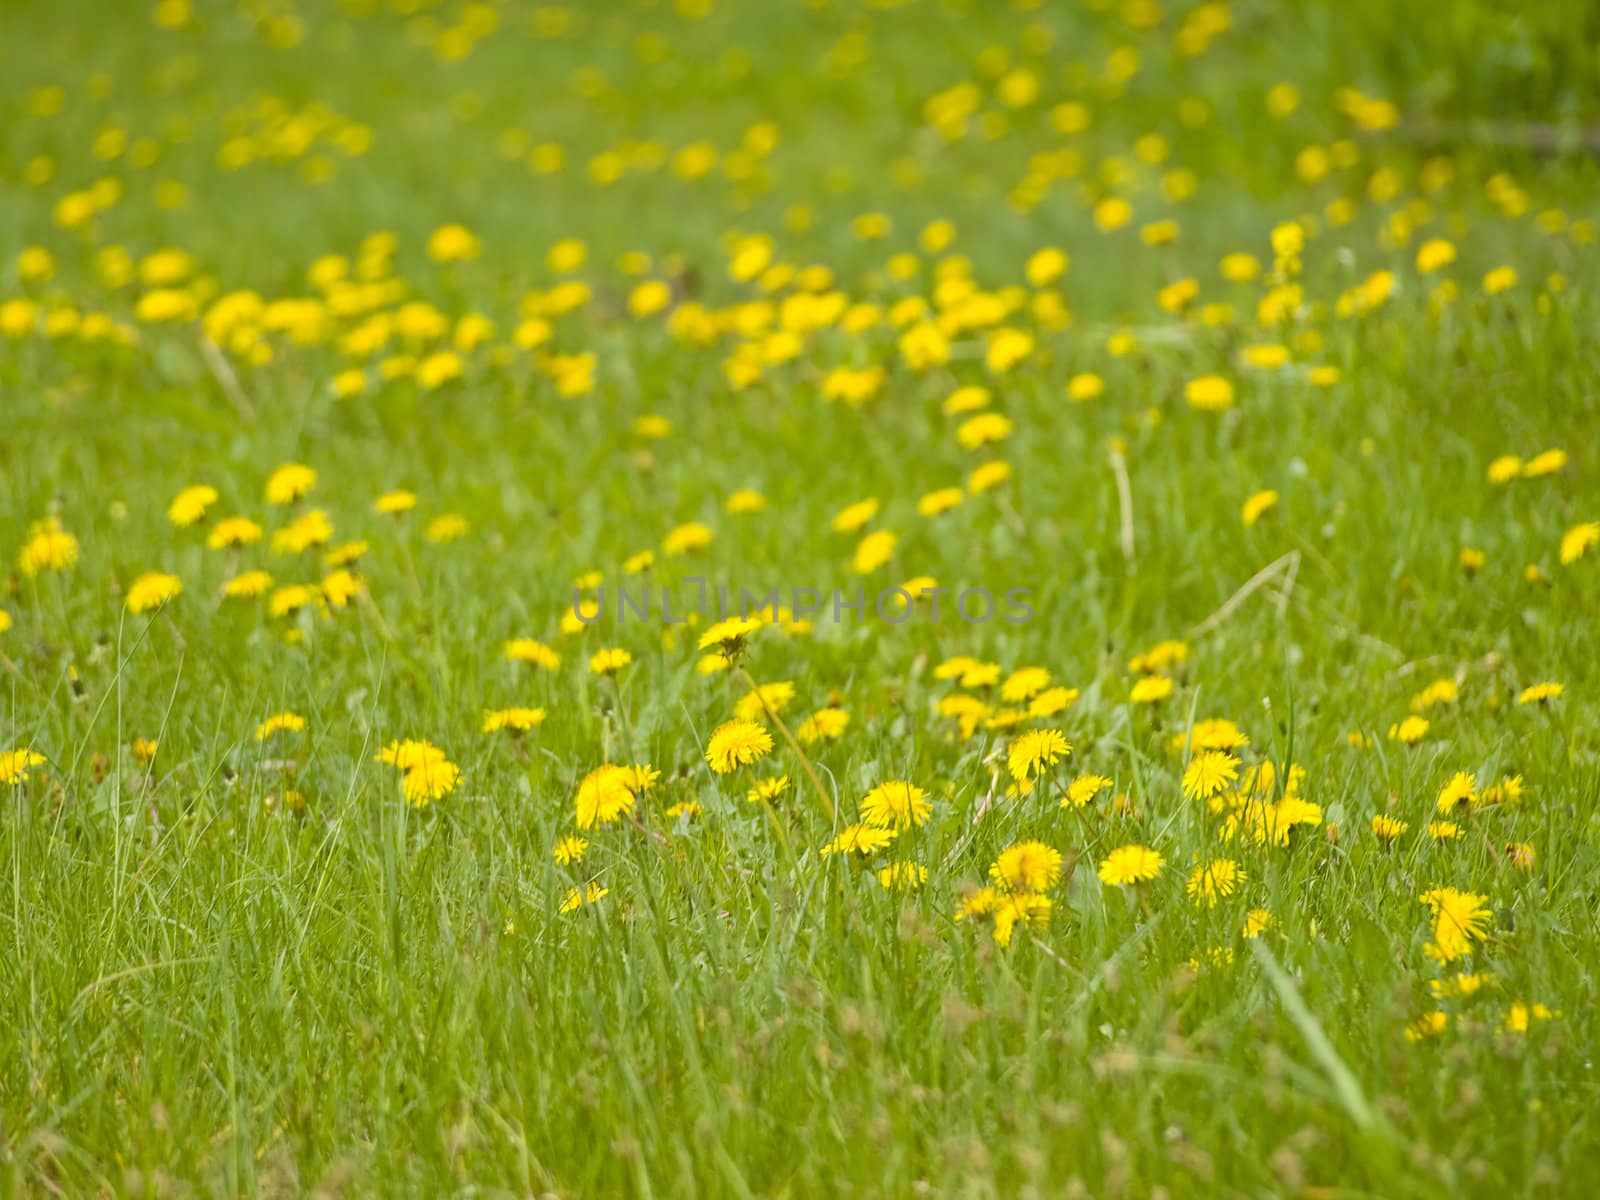 yellow dandelions by SNR